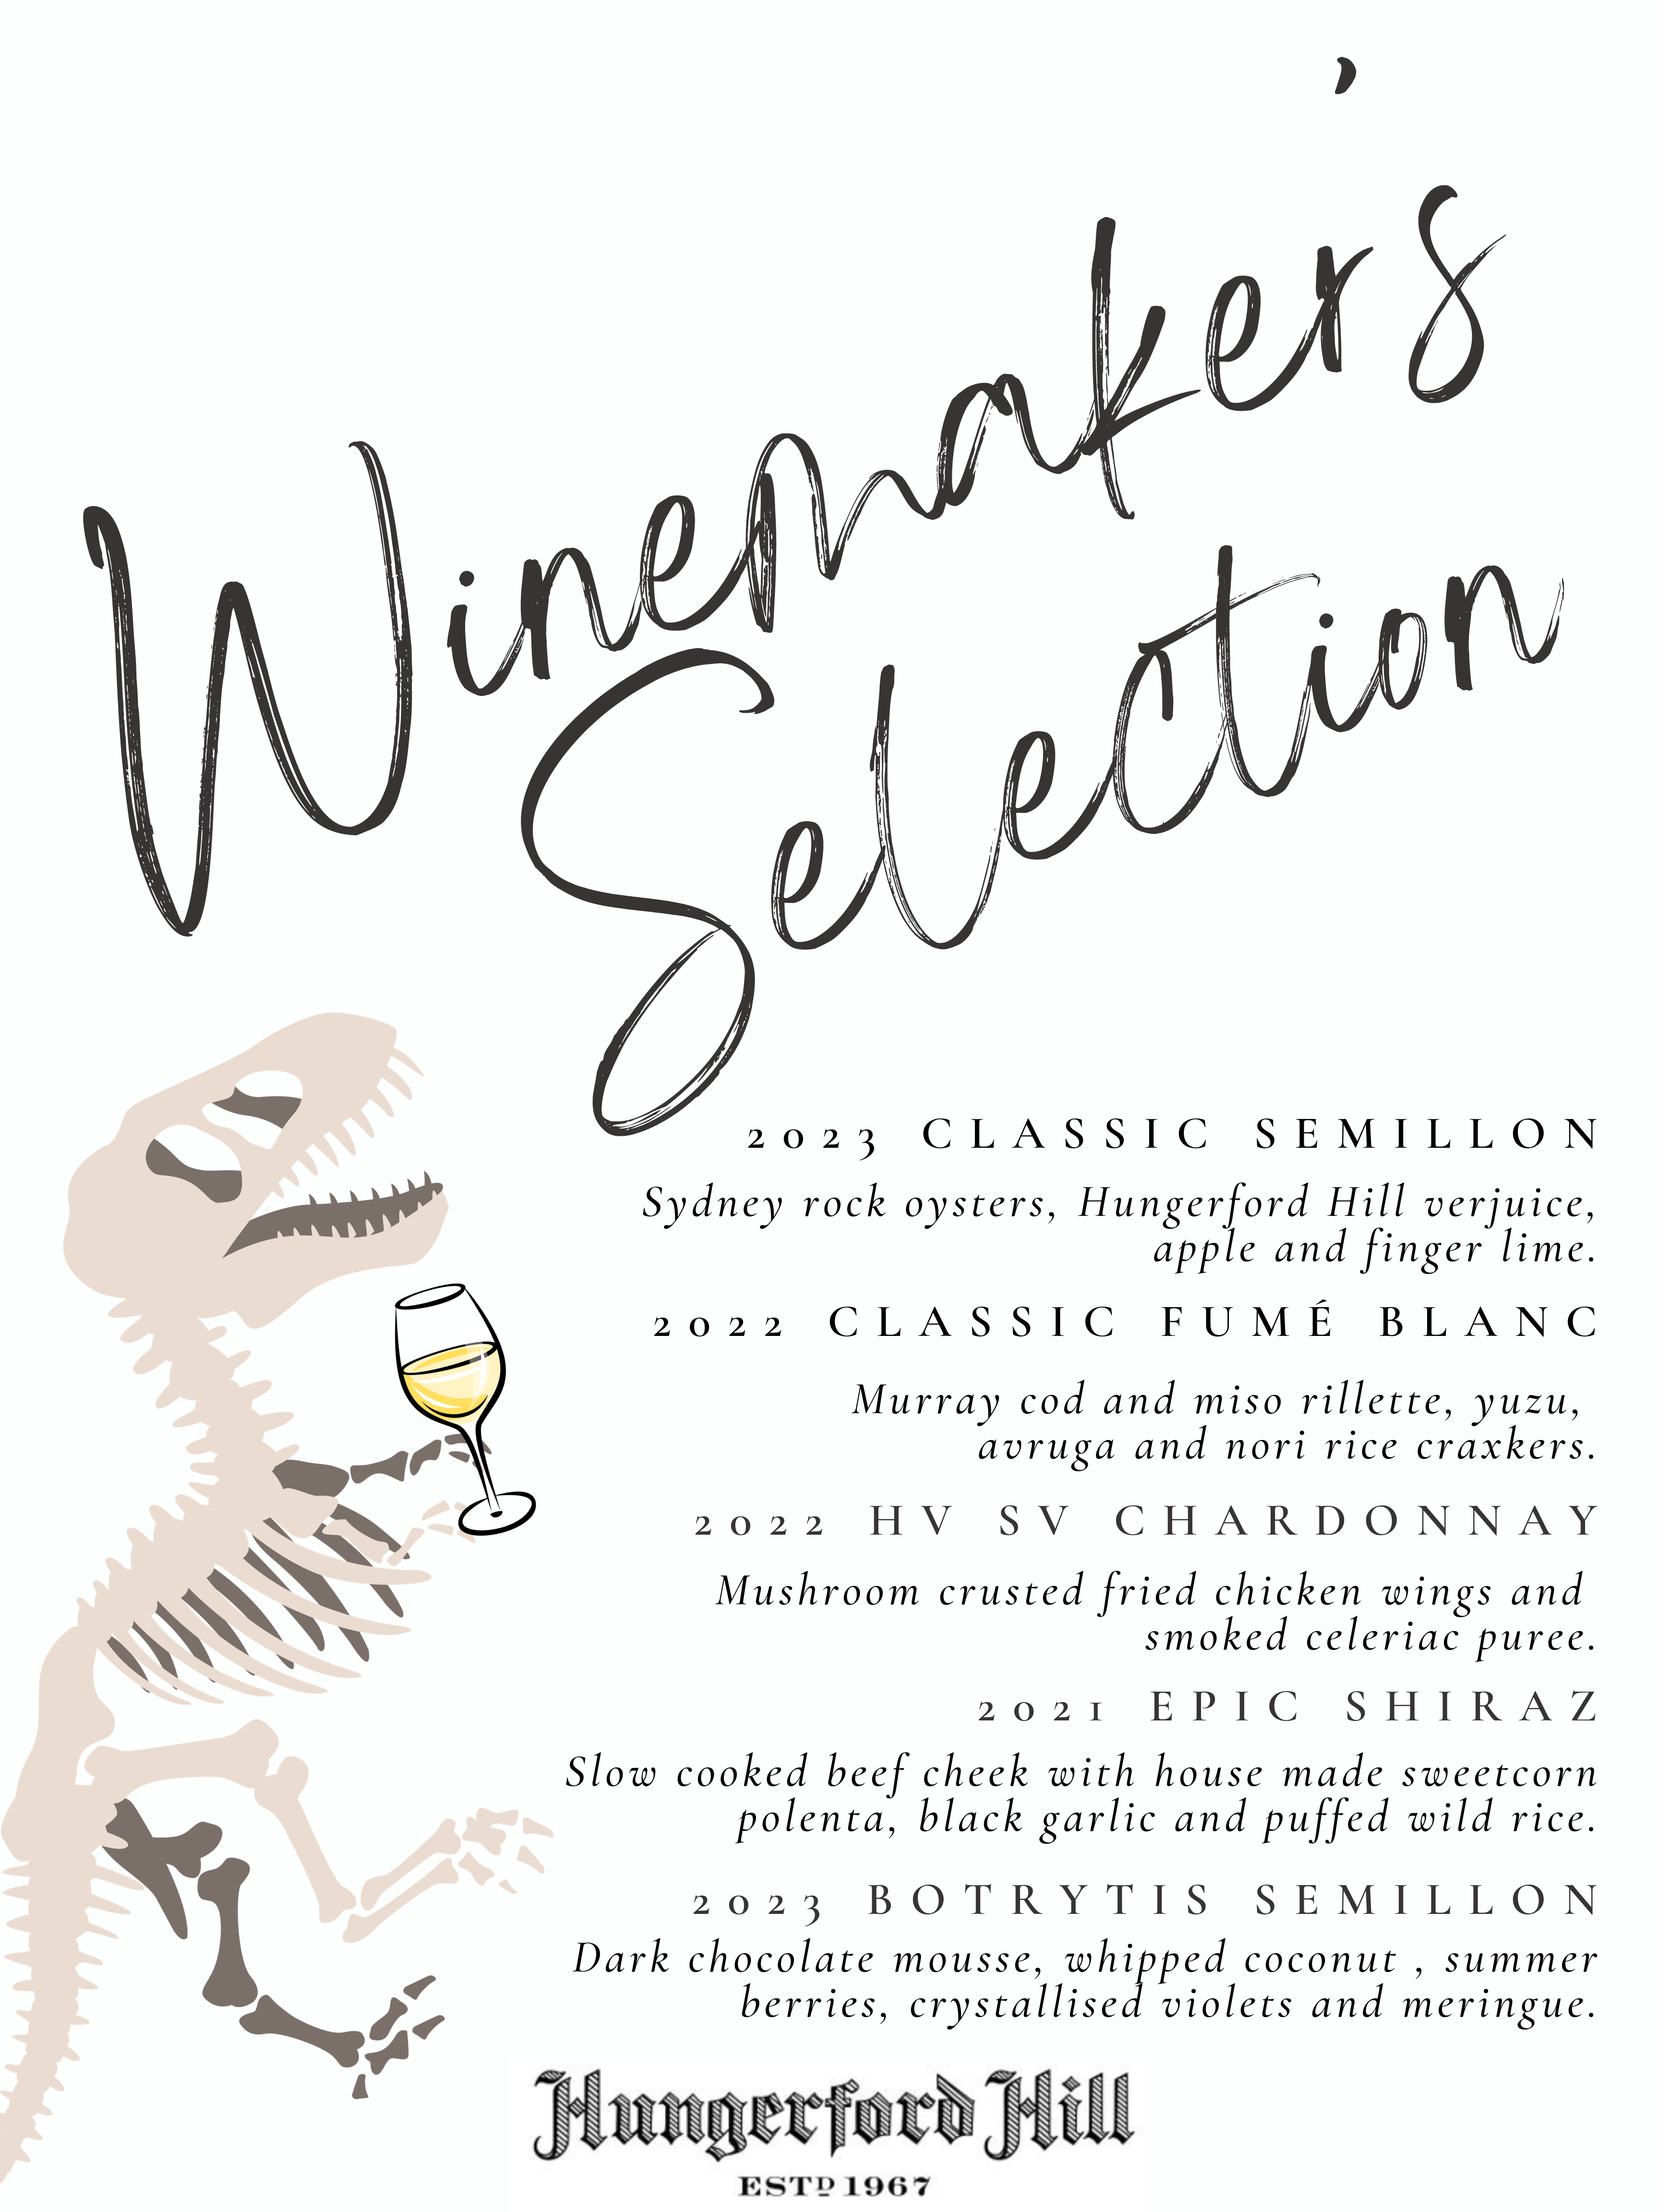 The Winemaker's Selection